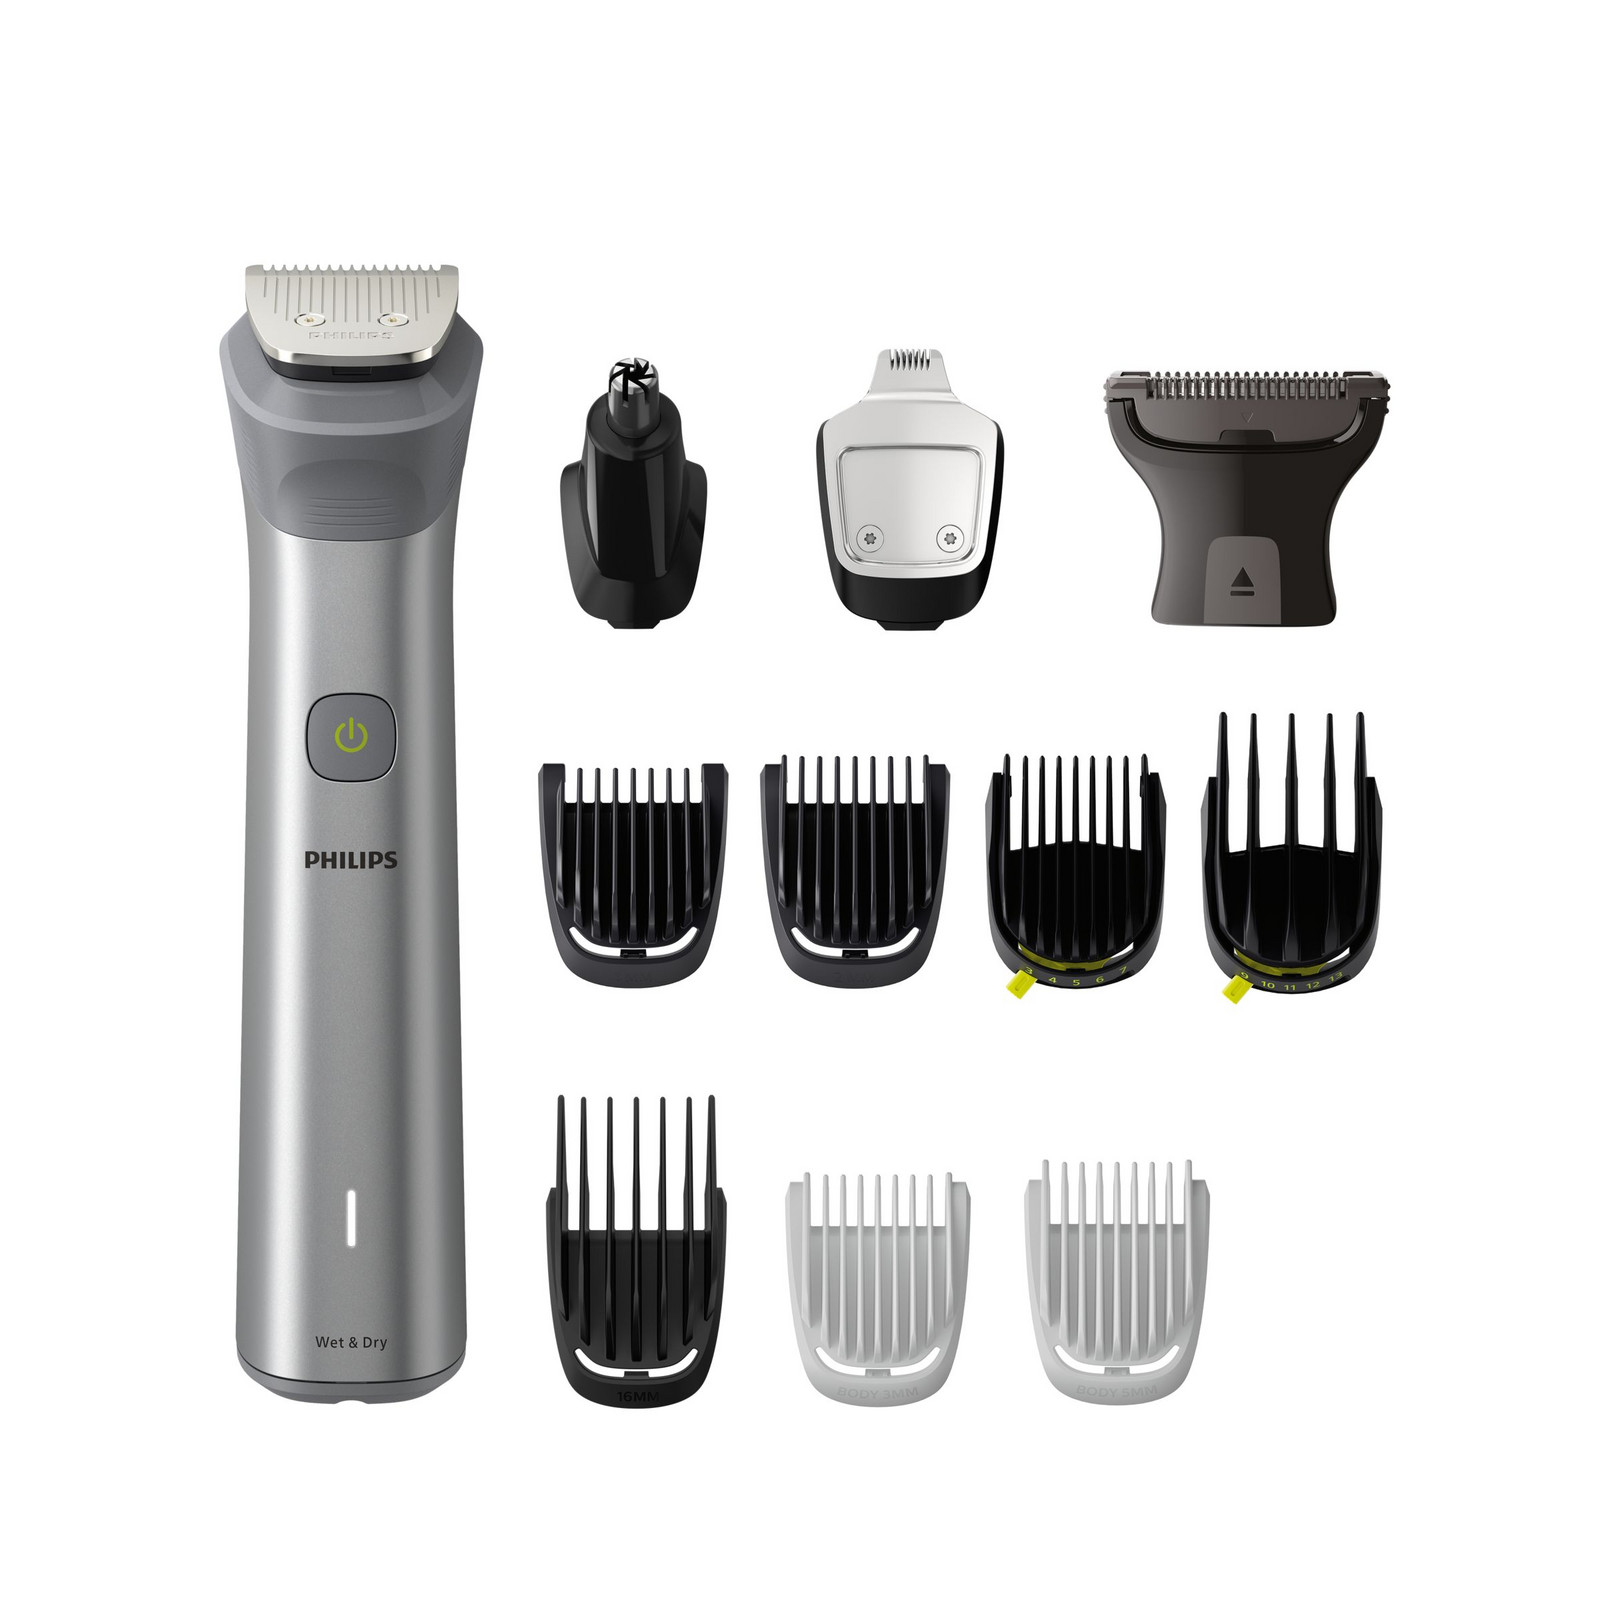 Philips All-in-One Trimmer - 5000 Series - MG5950/15